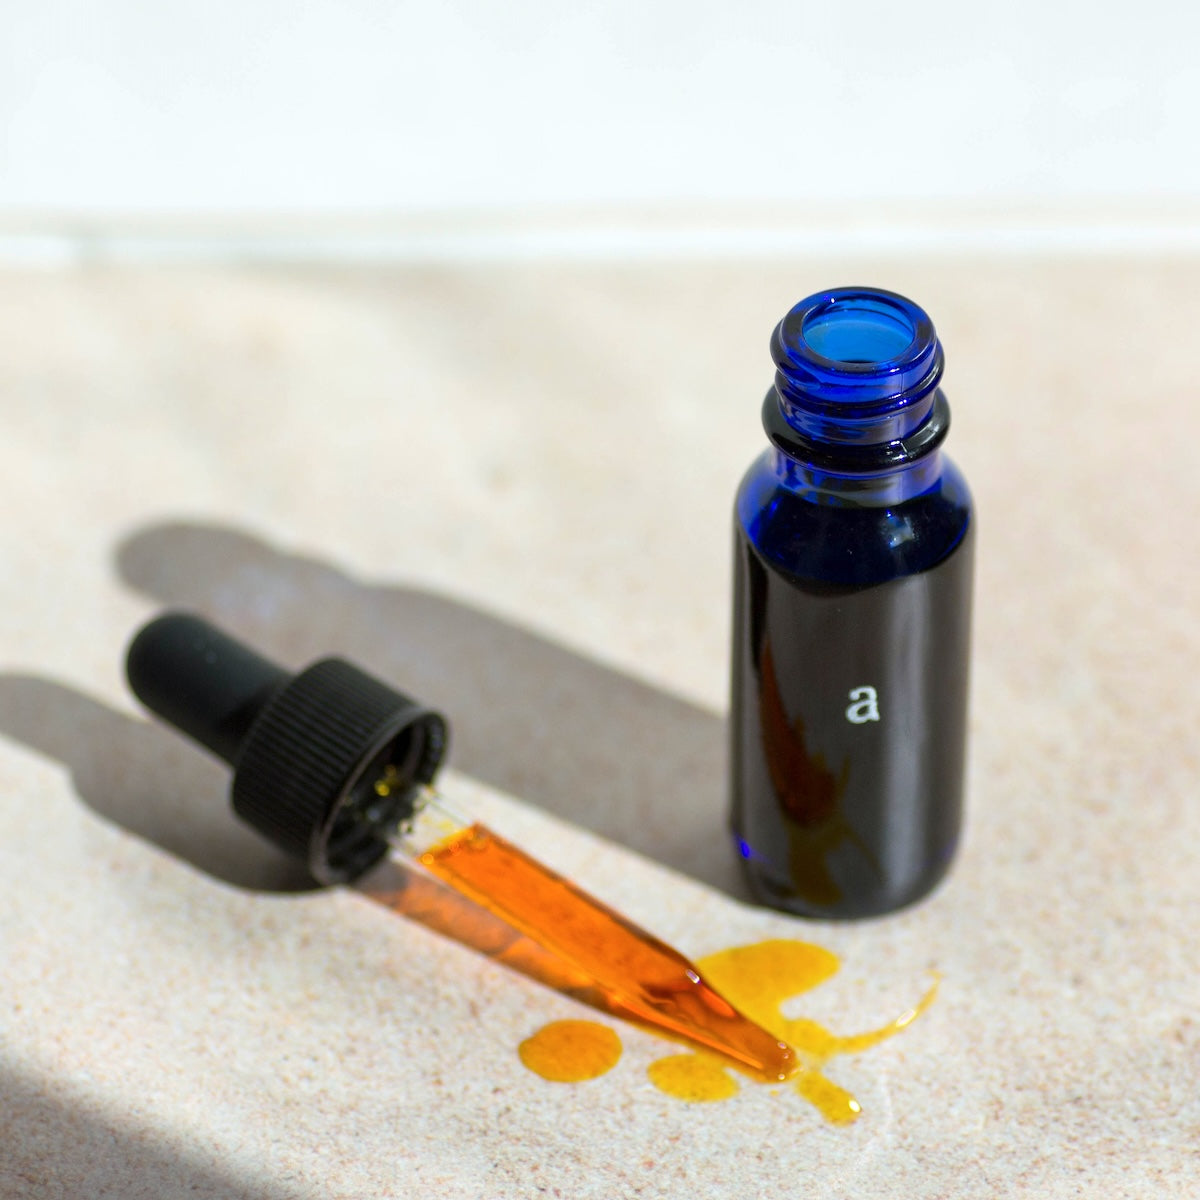 A half-ounce Age Care Facial Serum in a vibrant blue glass dropper bottle with visible dropper spilling a golden, fast-absorbing oil onto a sunlit, sandy surface, embodying the nourishing blend of Sea Buckthorn Oil, Squalane from Olives, and Frankincense Essential Oil with CoQ10 for anti-aging and moisturizing, ideal for all skin types, vegan from our facial care collection.